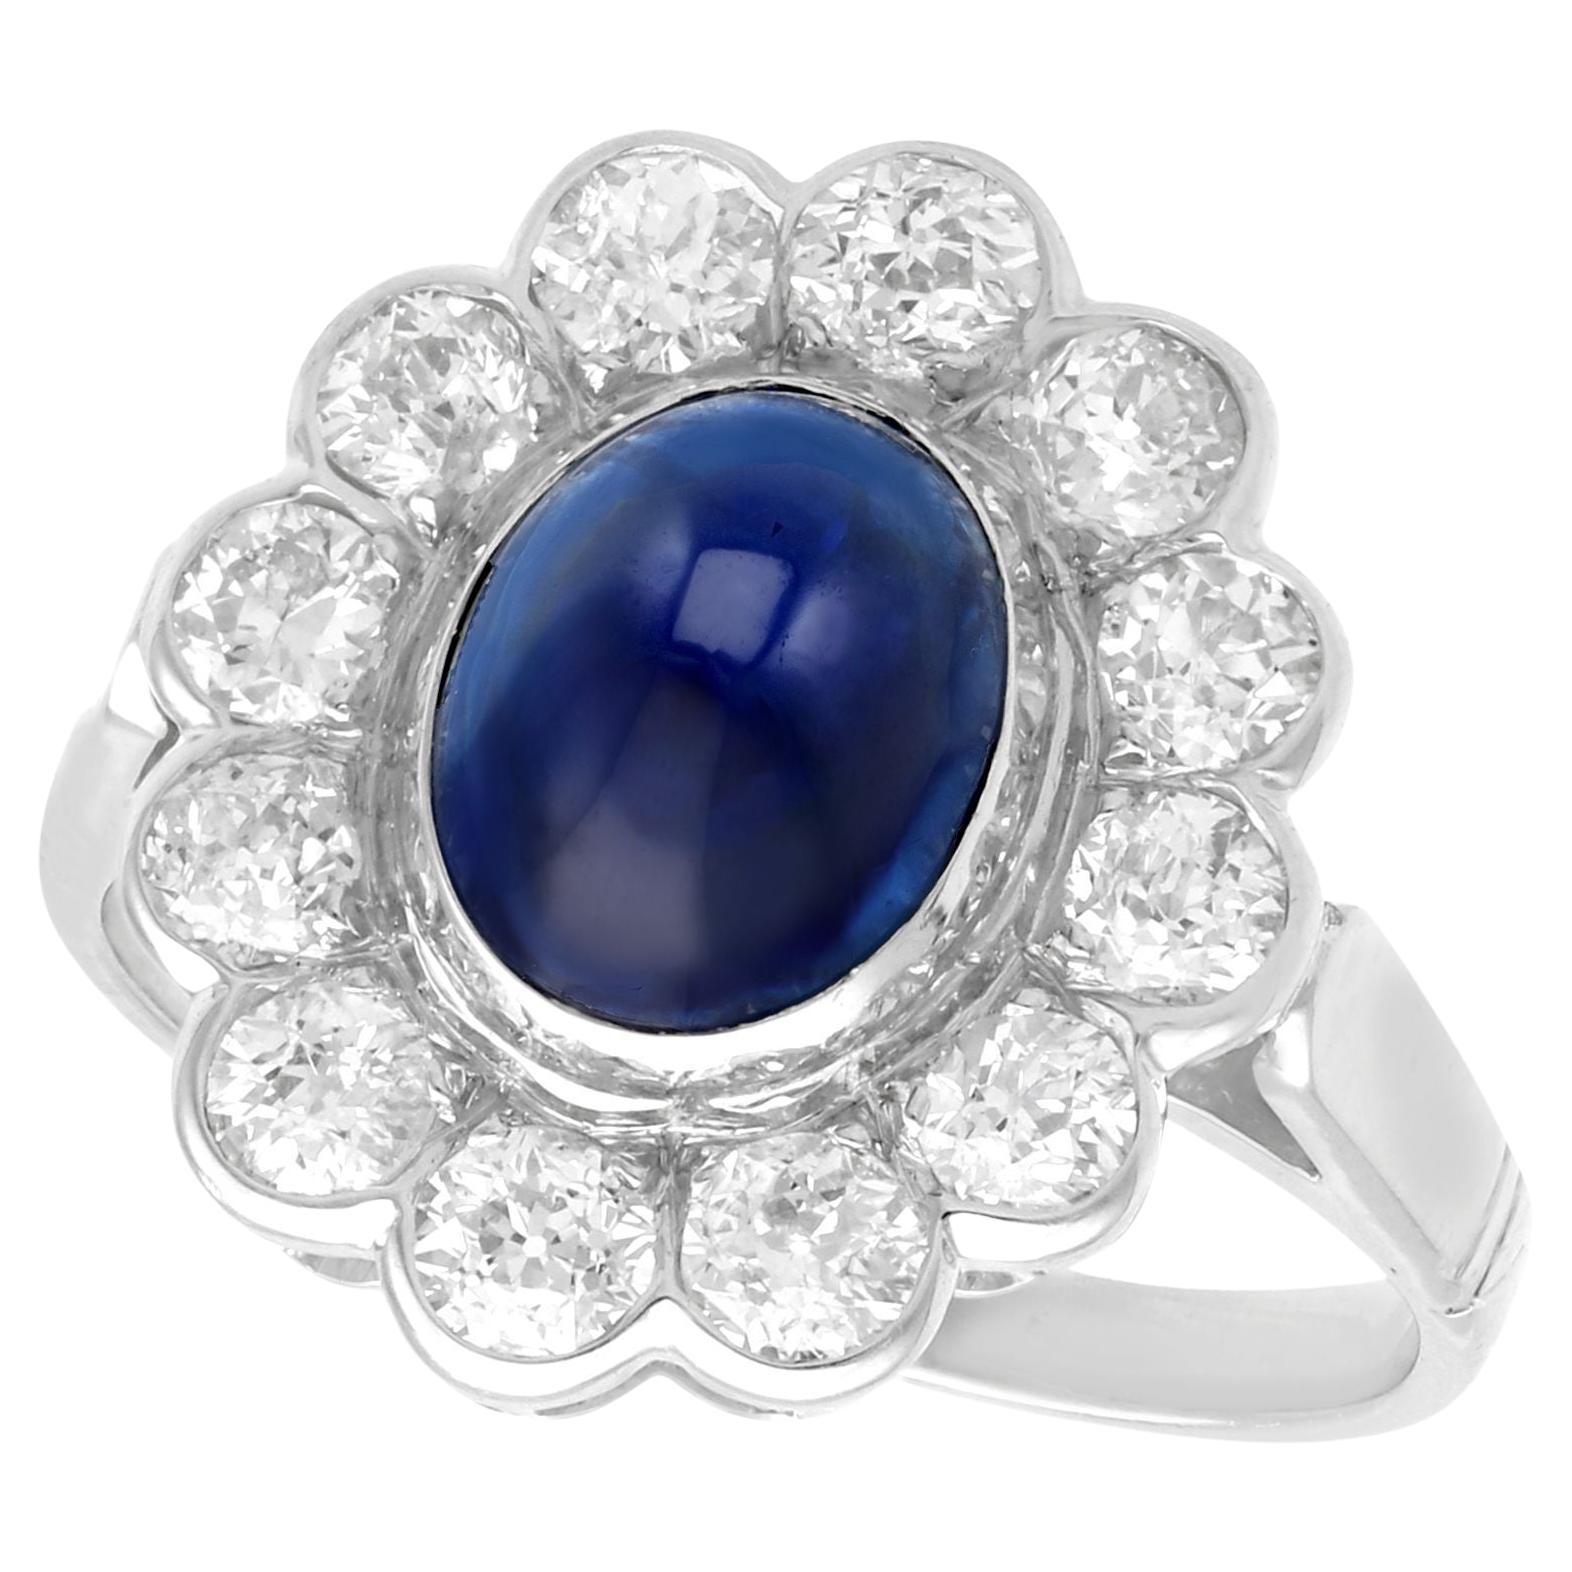 Antique 3.03ct Cabochon Cut Sapphire and 1.80ct Diamond White Gold Cluster Ring